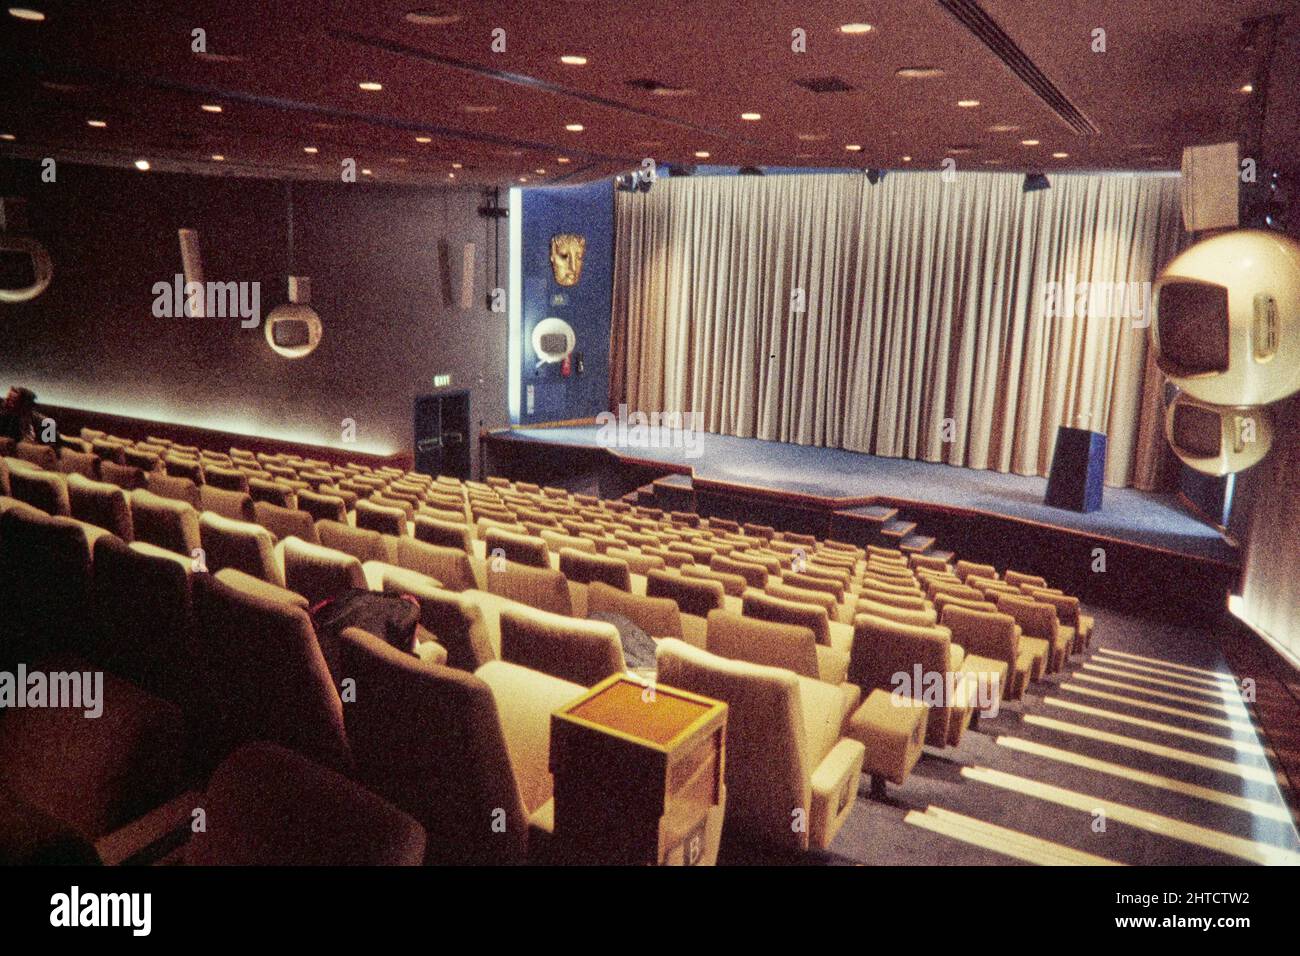 BAFTA Headquarters, Piccadilly, St James's, City of Westminster, London, 1976-1999. The auditorium in the BAFTA headquarters, with spherical Decca monitors suspended along the walls. A new centre for the British Academy of Film and Television Arts opened at 195 Piccadilly in 1976. Between 1883 and 1970, the building had housed the Royal Institute of Painters in Water Colours. The architect for the theatre's refurbishment, and the designer of the 26&quot; Decca colour monitors which were suspended in the auditorium, was Brian Perry. Stock Photo